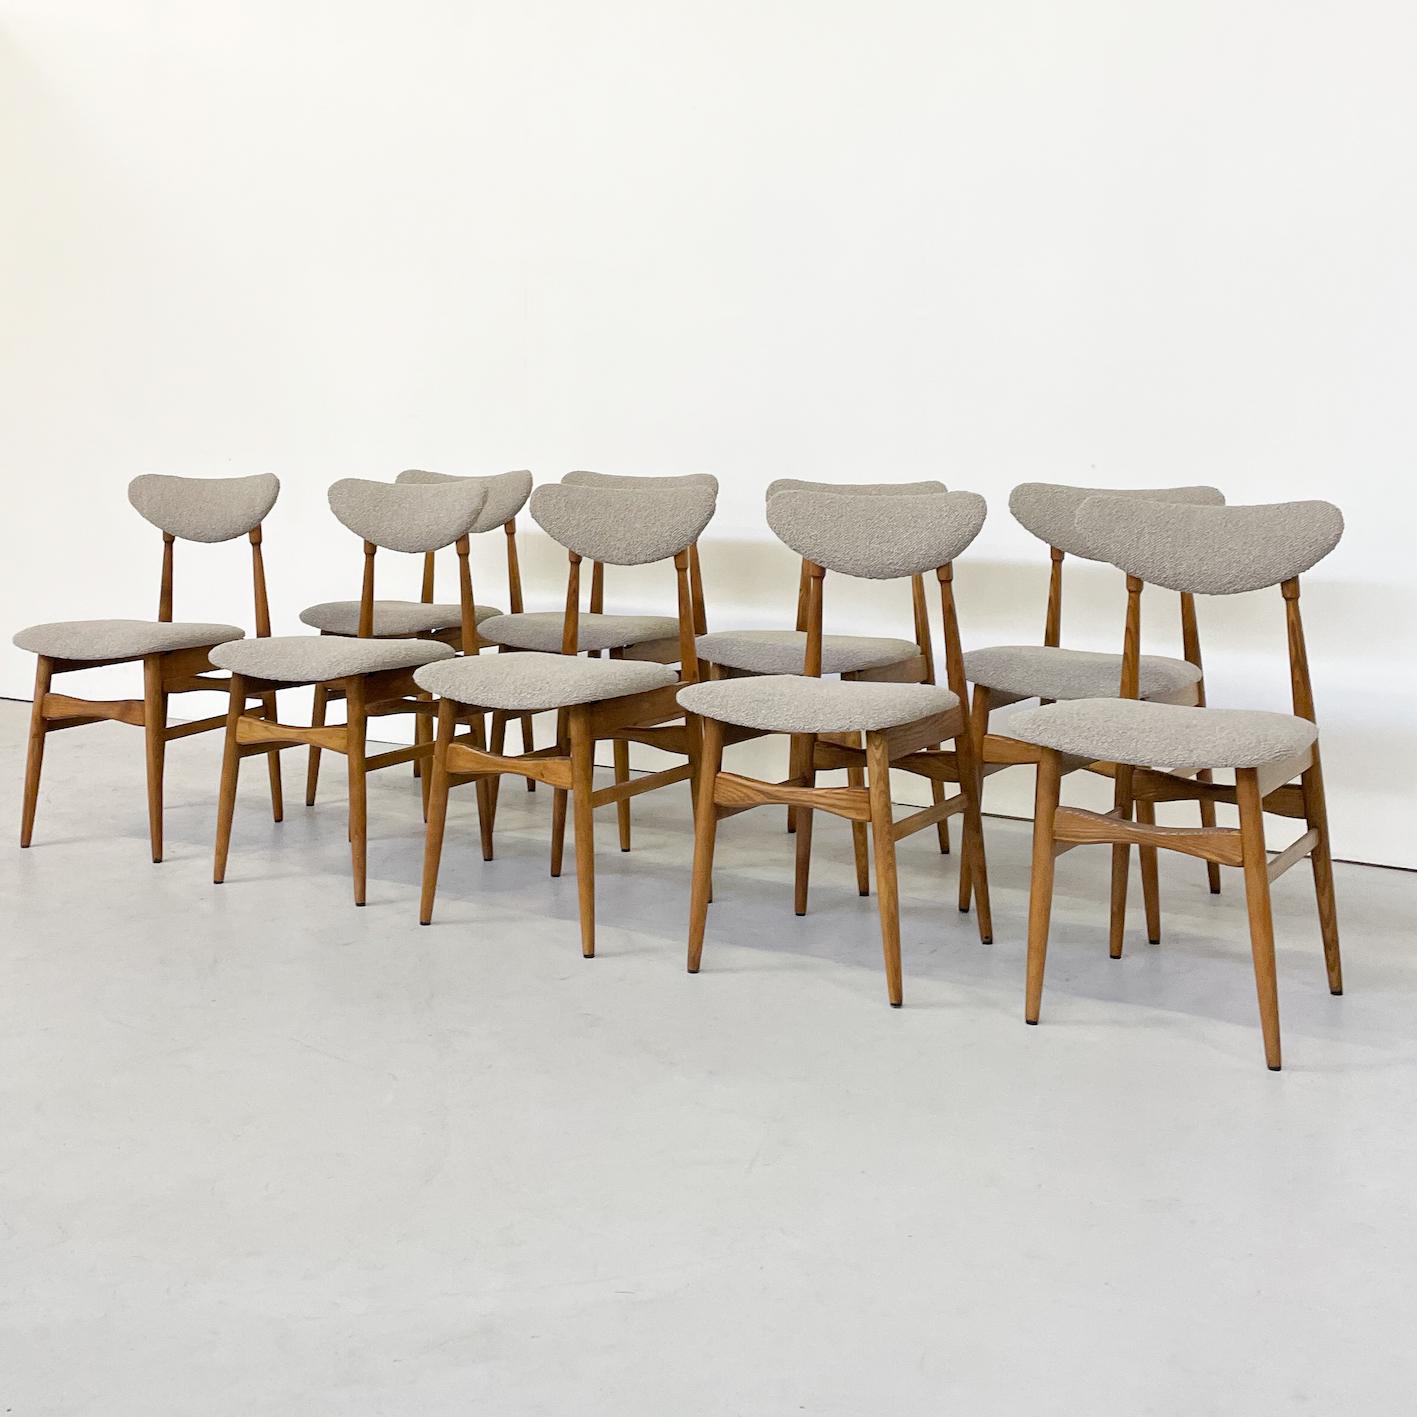 Mid-20th Century Mid-Century Modern Set of 12 Chairs, Italy, 1960s - New Upholstery For Sale